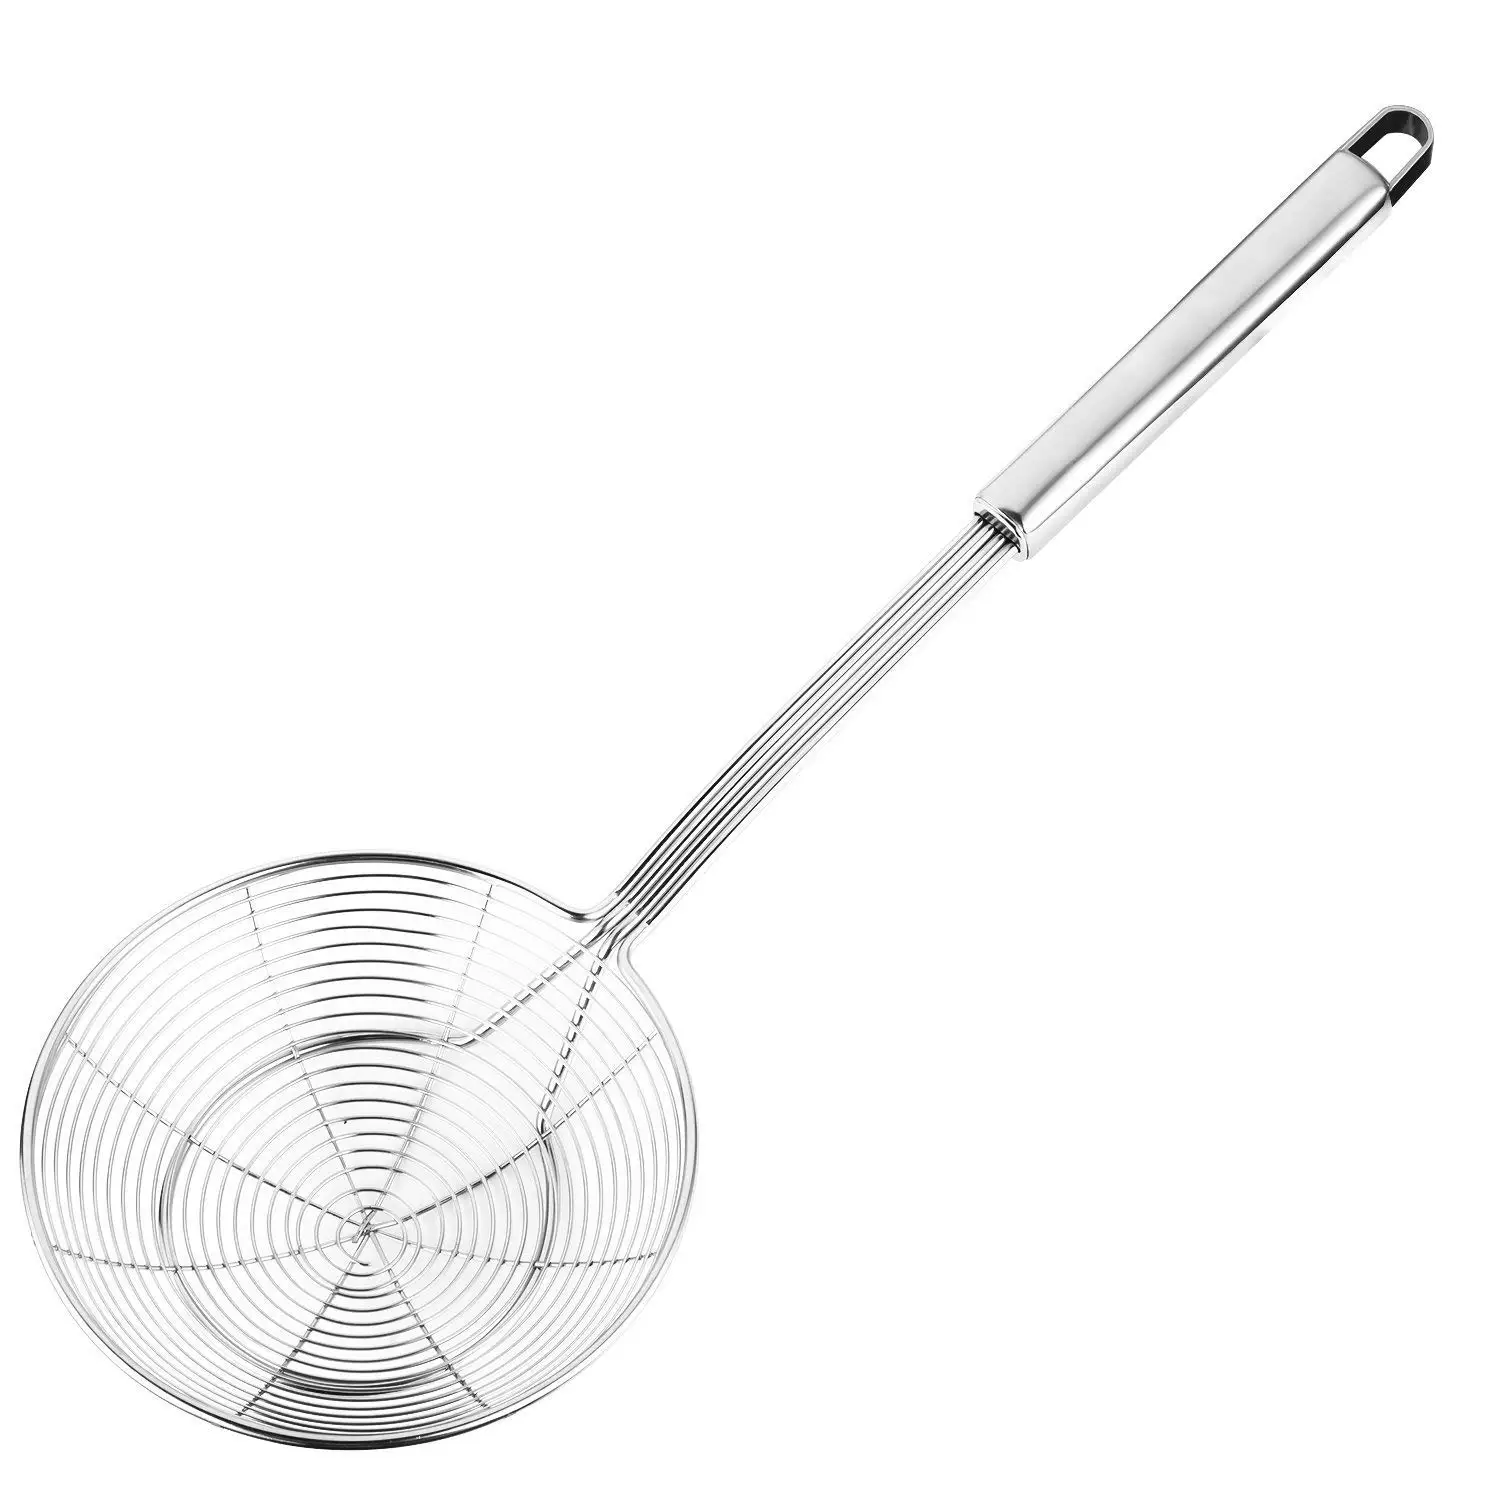 Solid Stainless Steel Spider Strainer Skimmer Ladle for Cooking and Frying Kitchen Utensils Wire Strainer Pasta Strainer Spoon